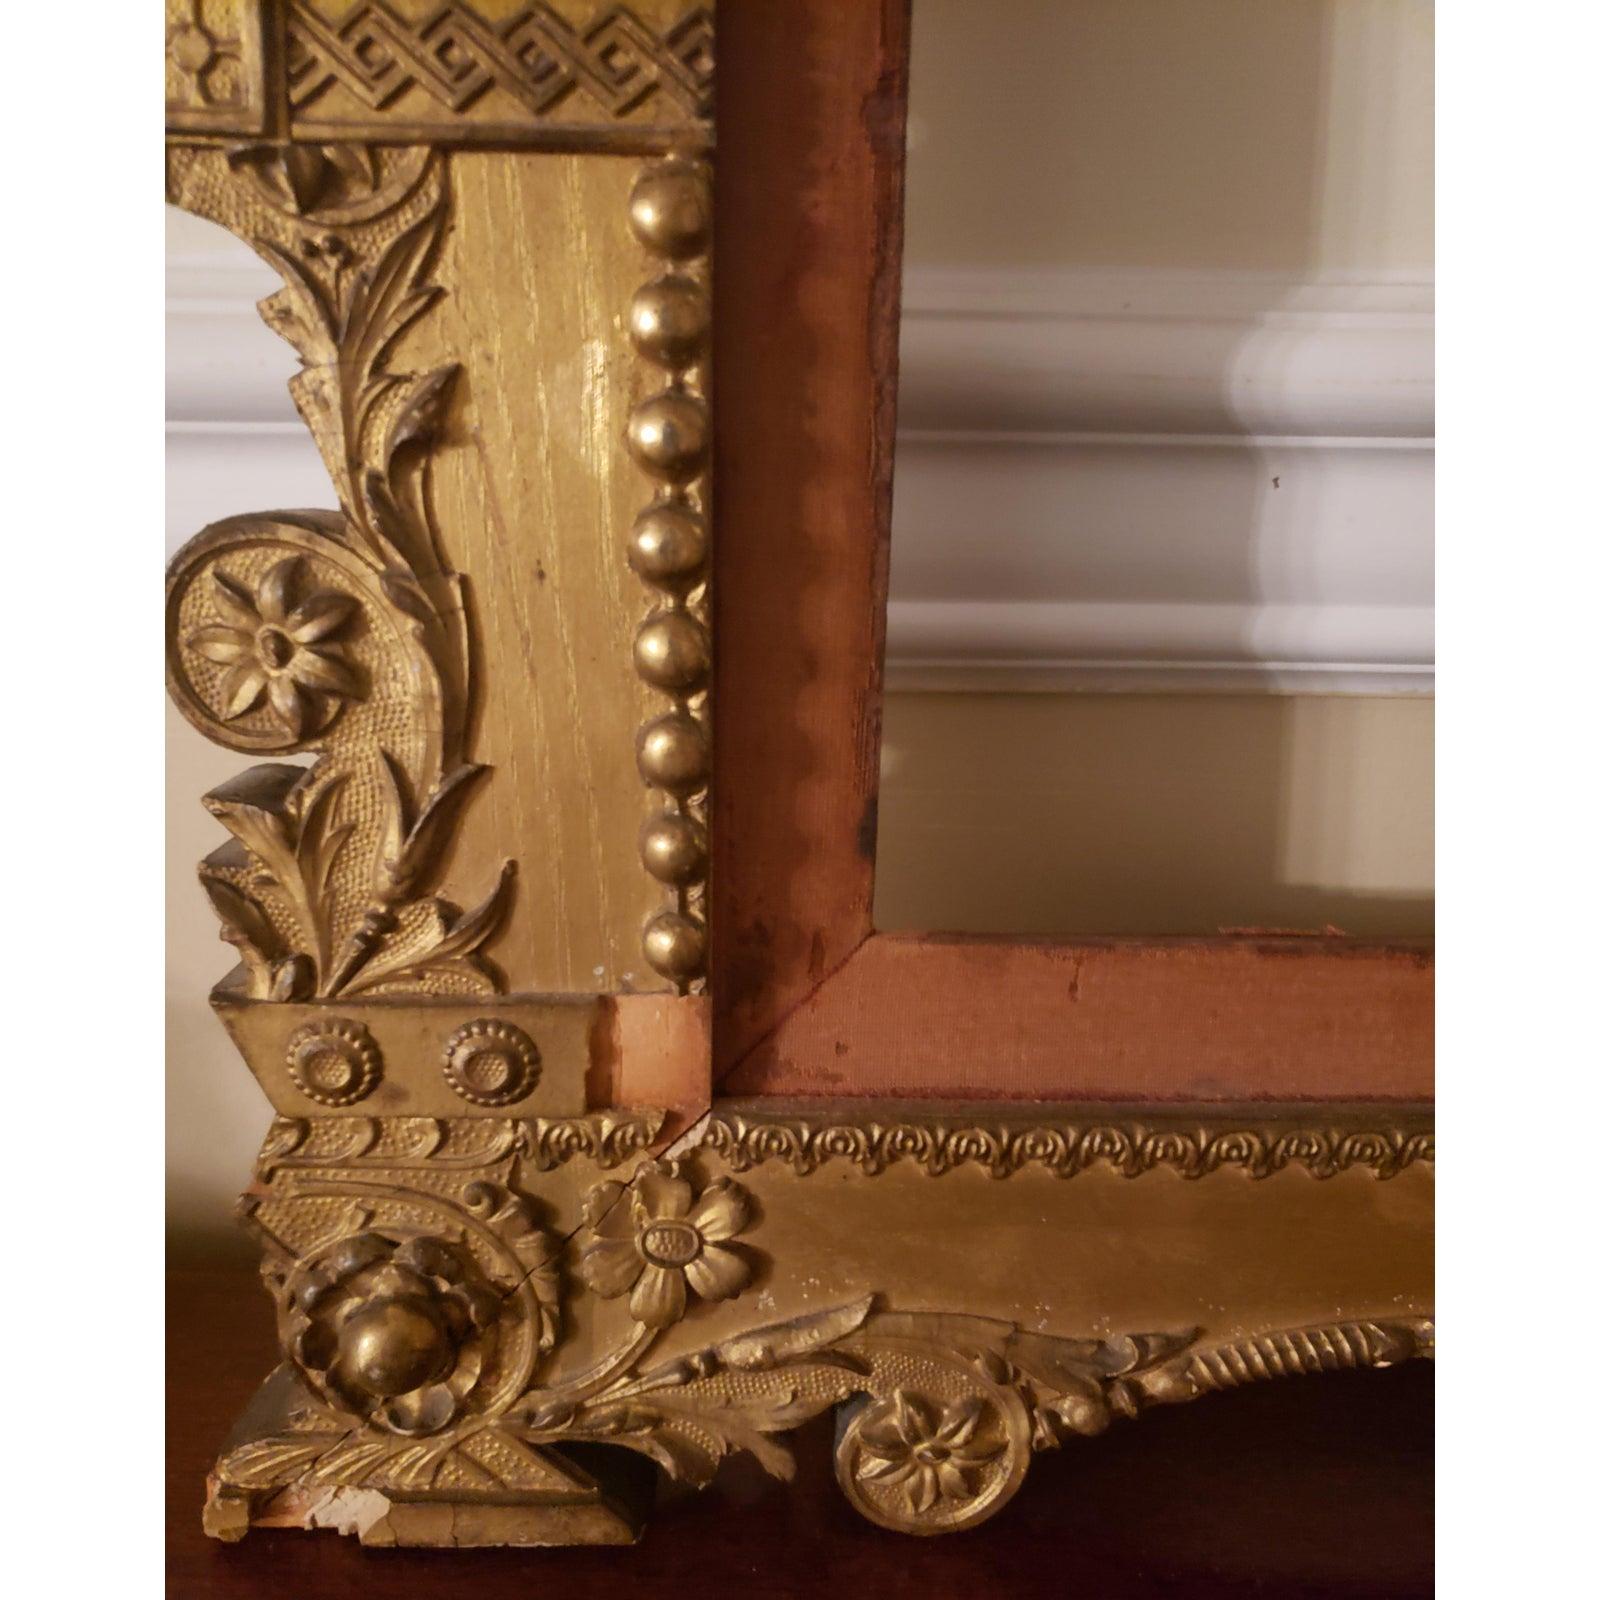 Rococo 1800s Edward Klauber Wood and Ormolu Ornate Picture Frame For Sale